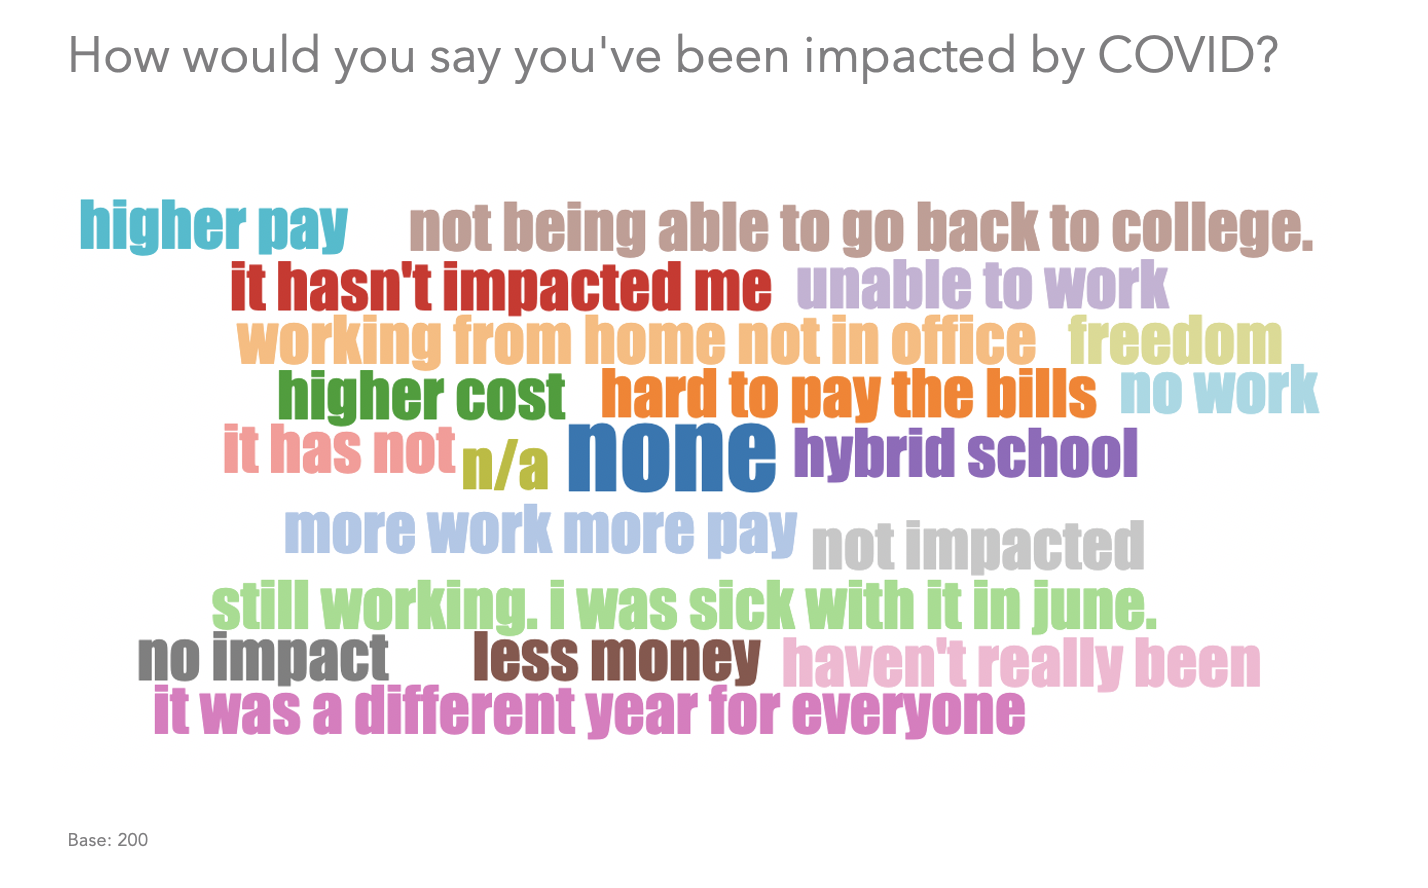 How would you say you've been impacted by COVID?